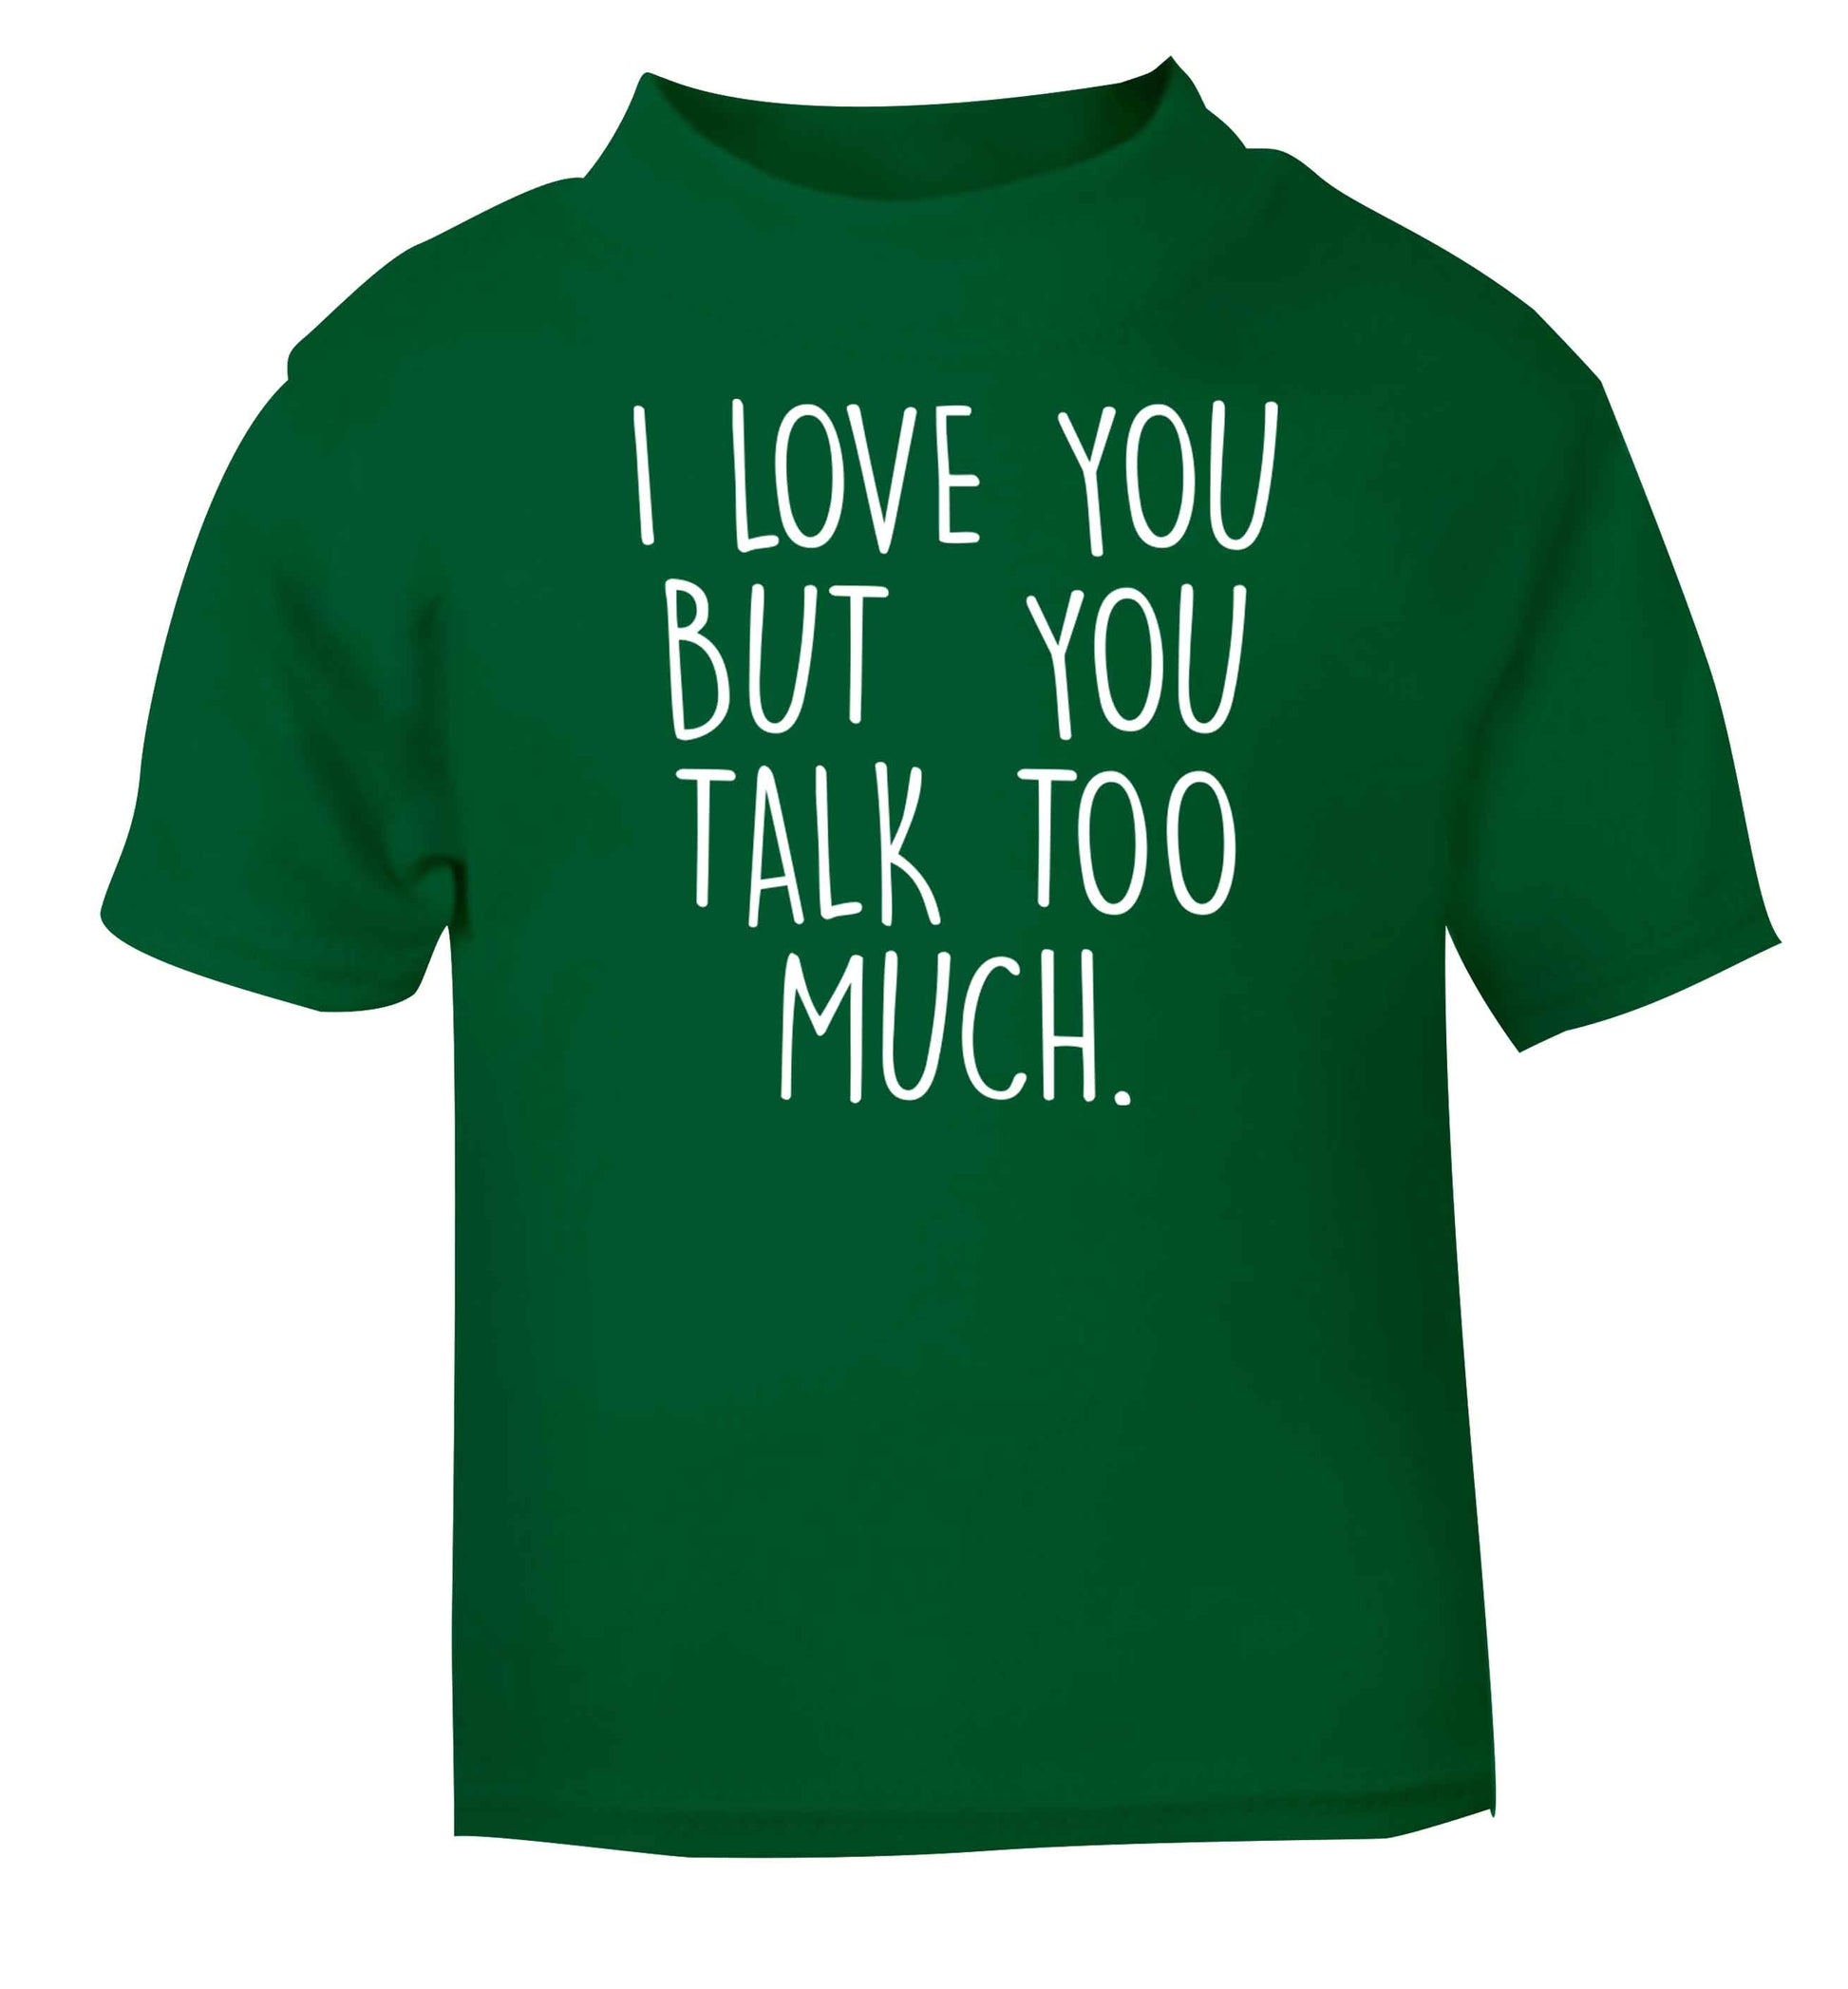 I love you but you talk too much green baby toddler Tshirt 2 Years